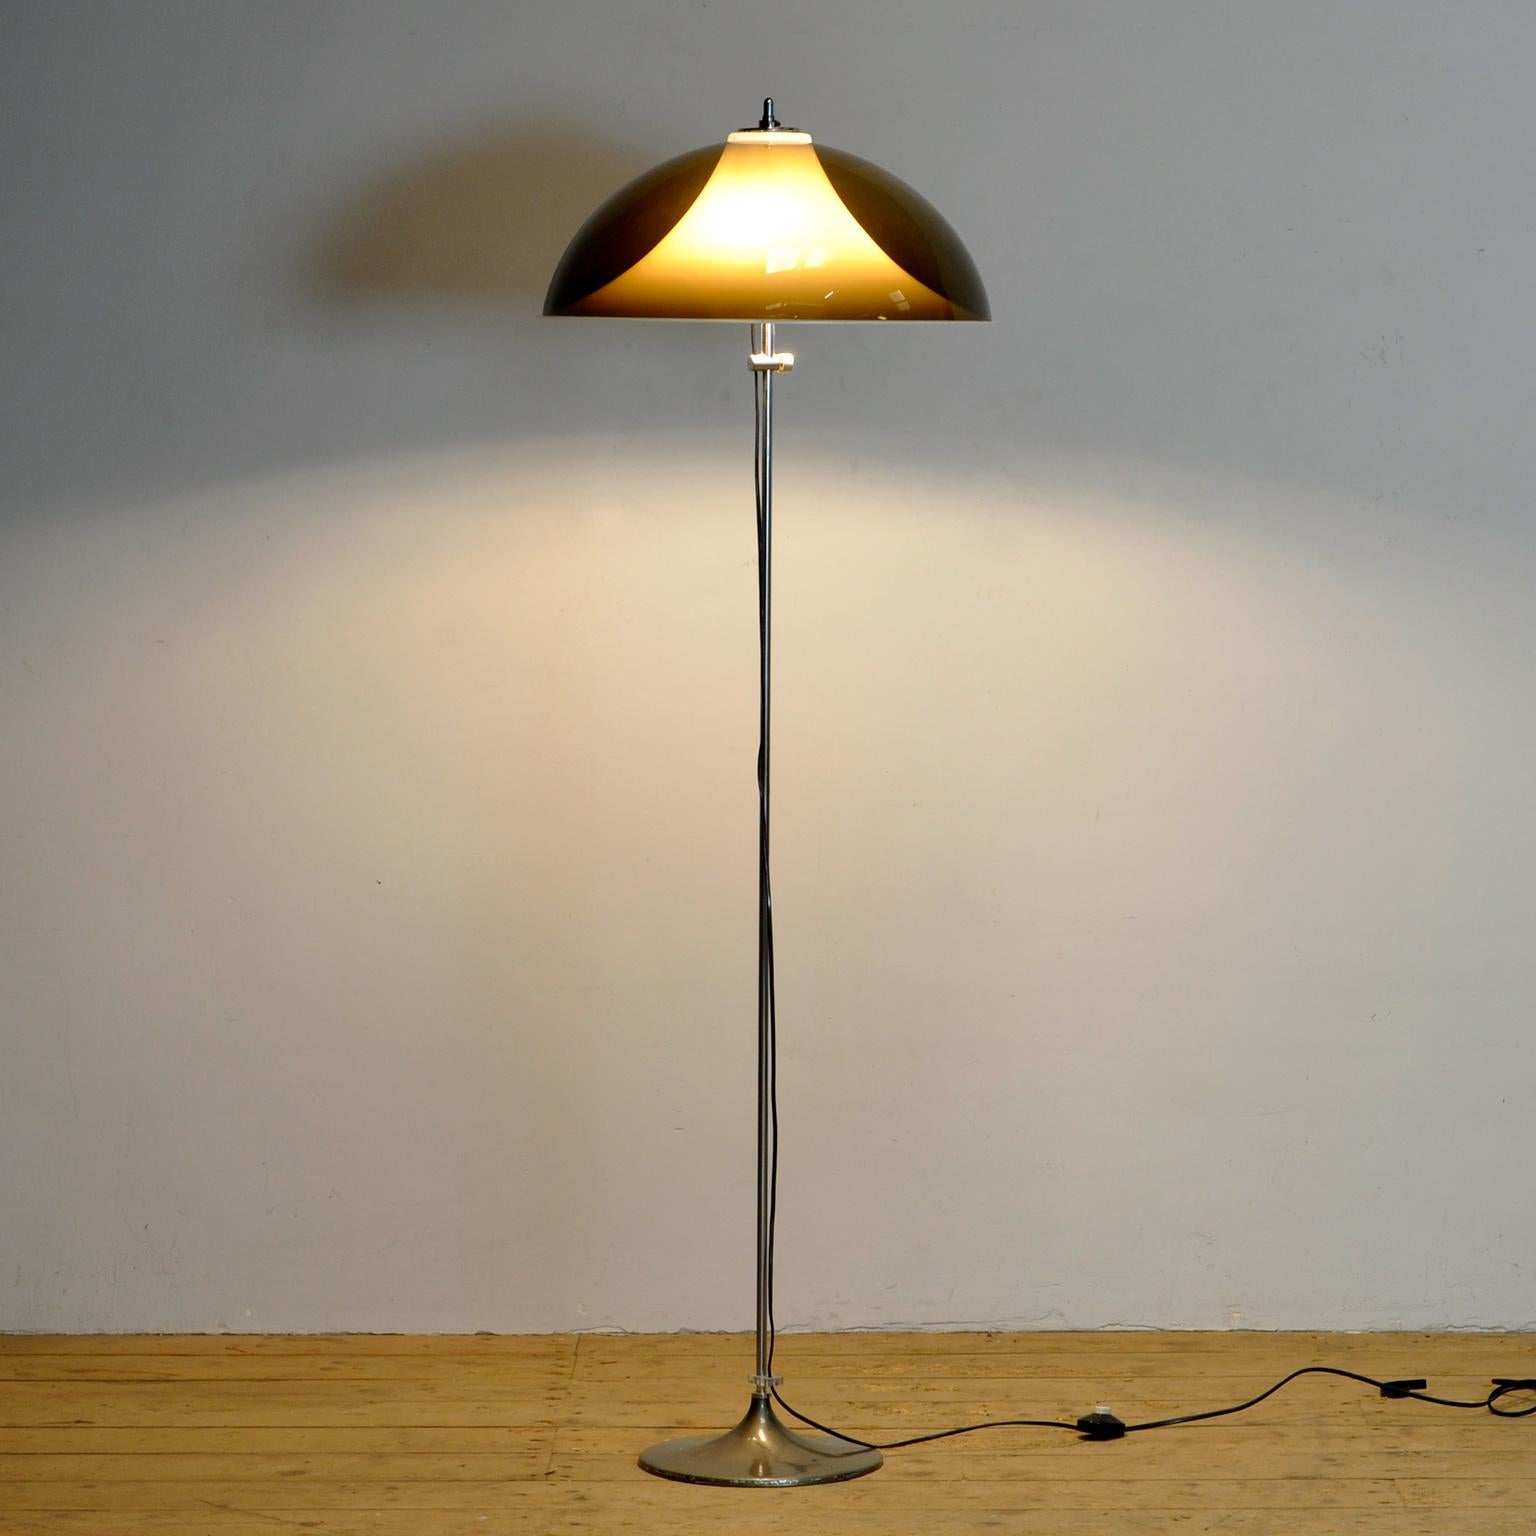 Atmospheric floor lamp designed in the style of Gino Sarfatti Italy and manufactured by Gepo N.V., Netherlands, 1960. It has an orange-brown translucent acrylic mushroom style lampshade resting on a white opal acrylic diffuser. The round metal base